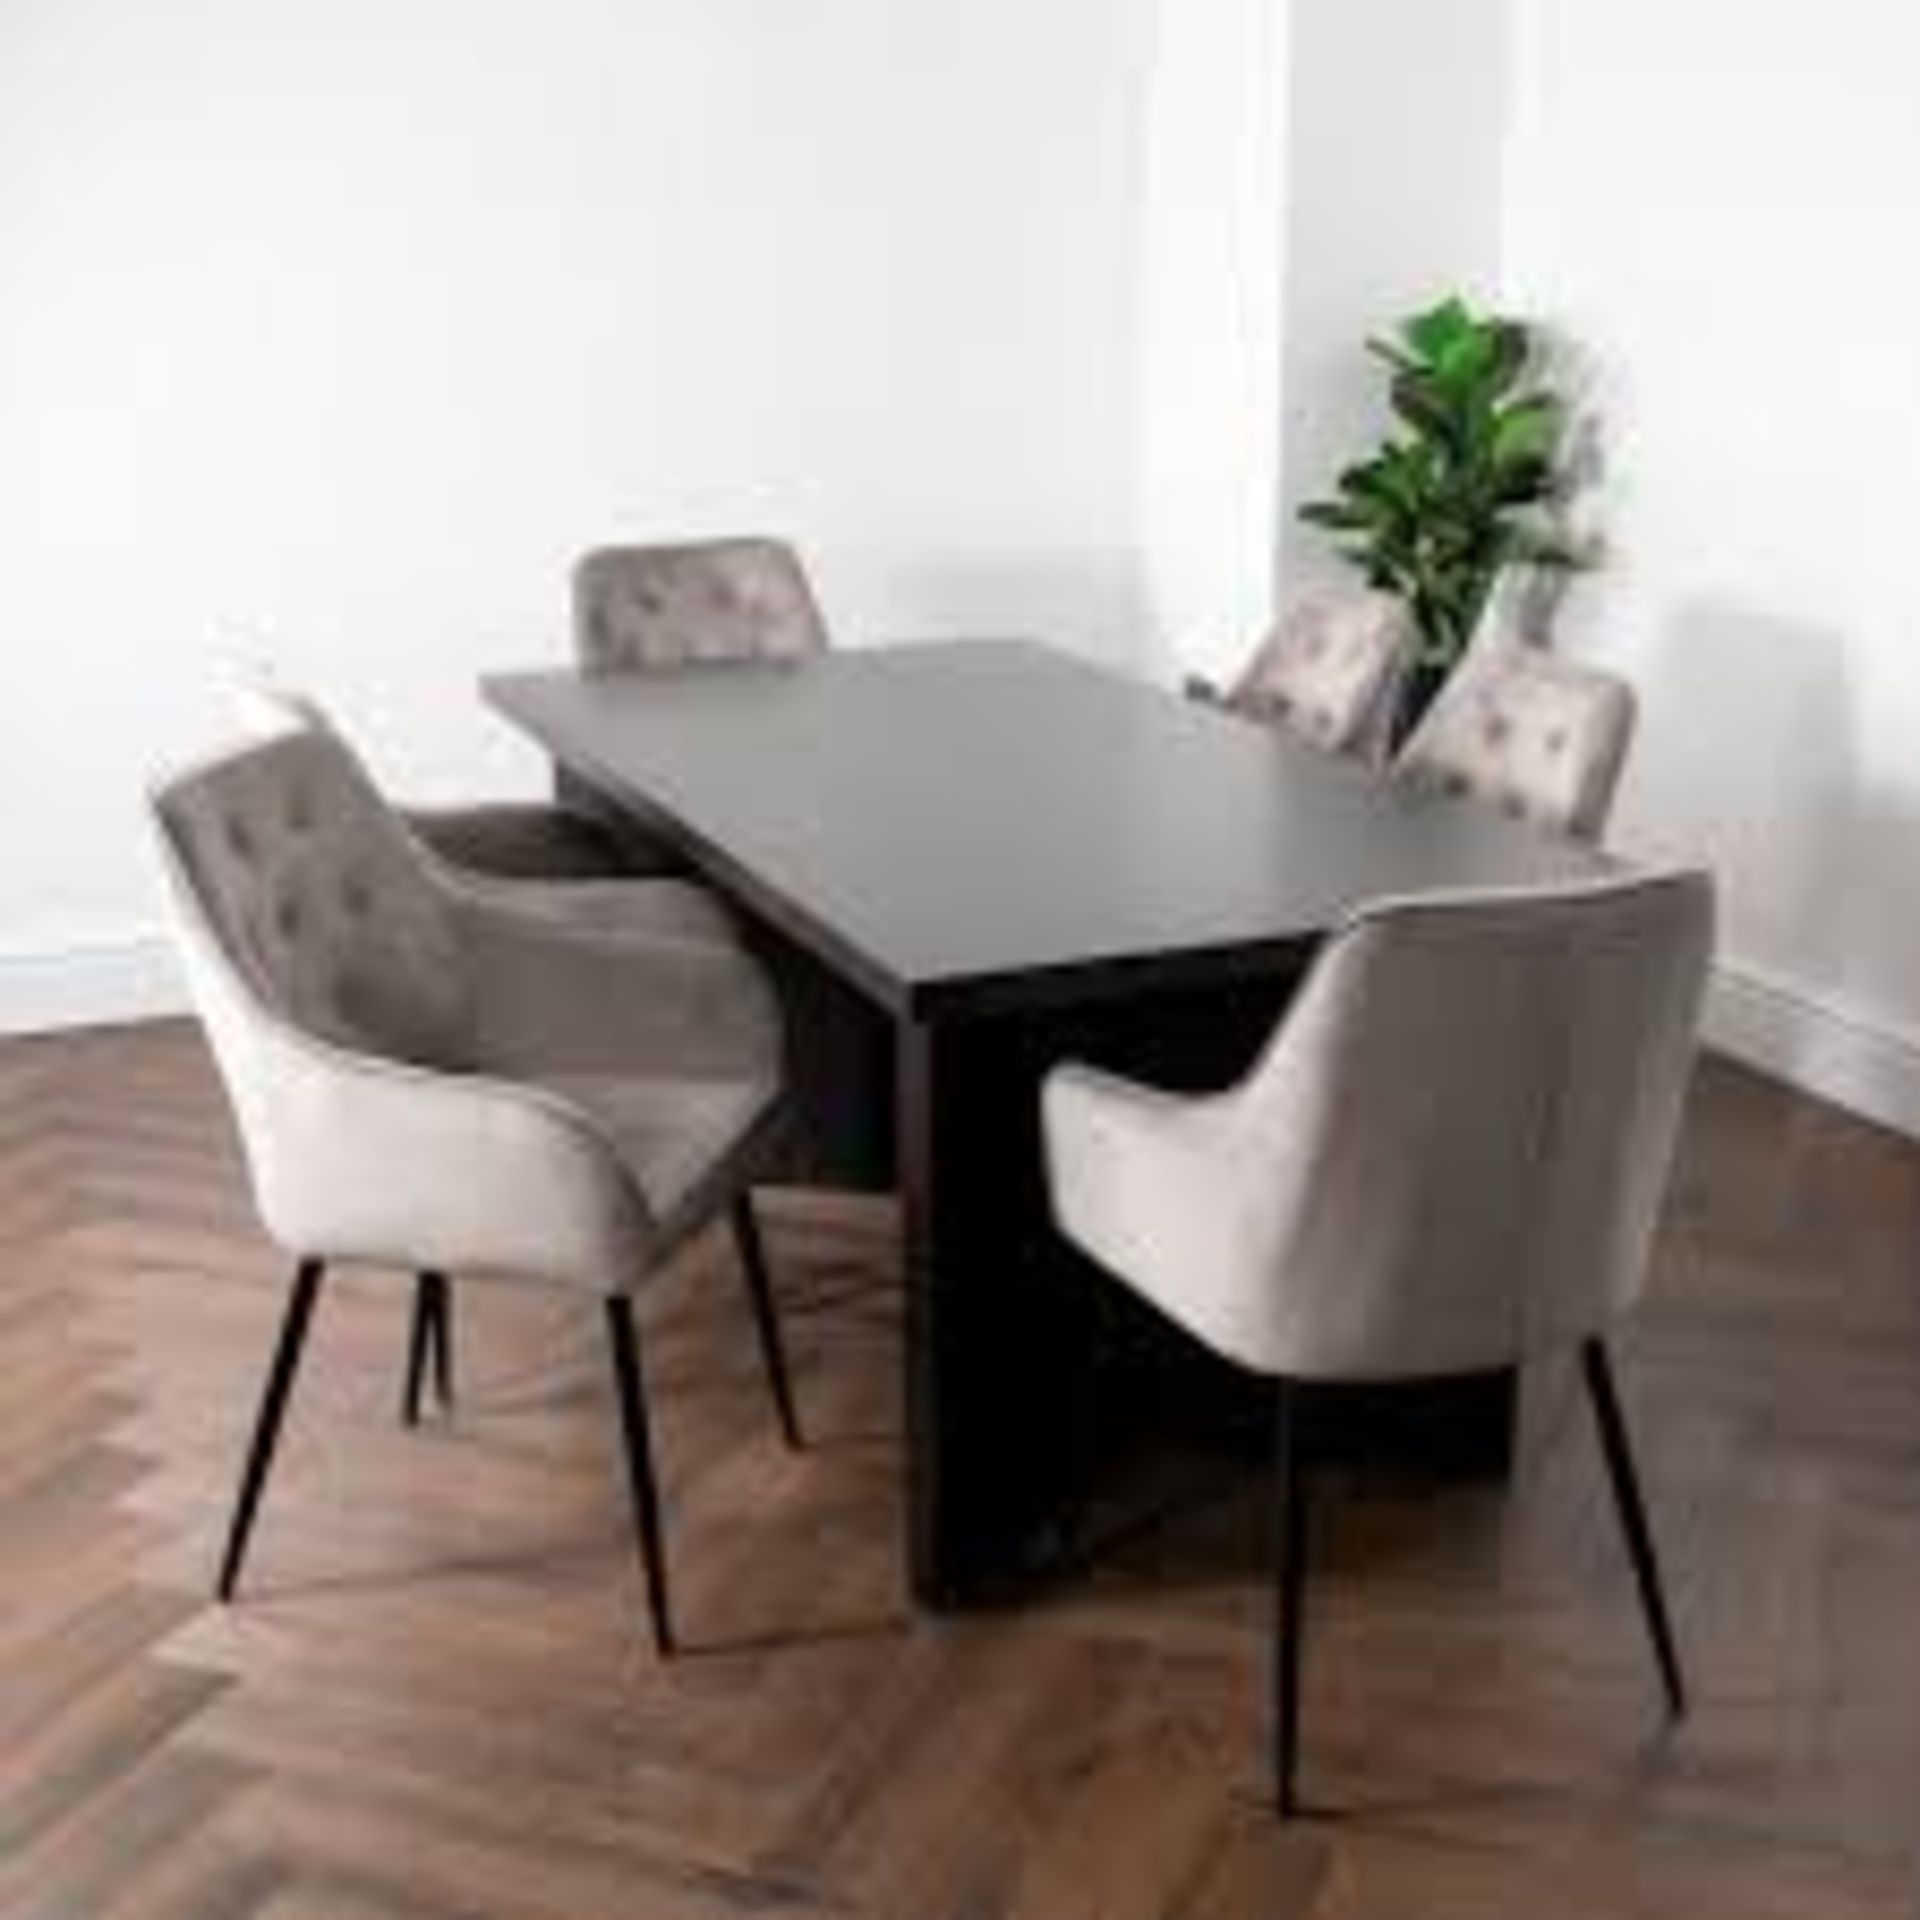 Brand New Espresso Walnut Ascot 6 Seater Dining Table (table only) RRP £950